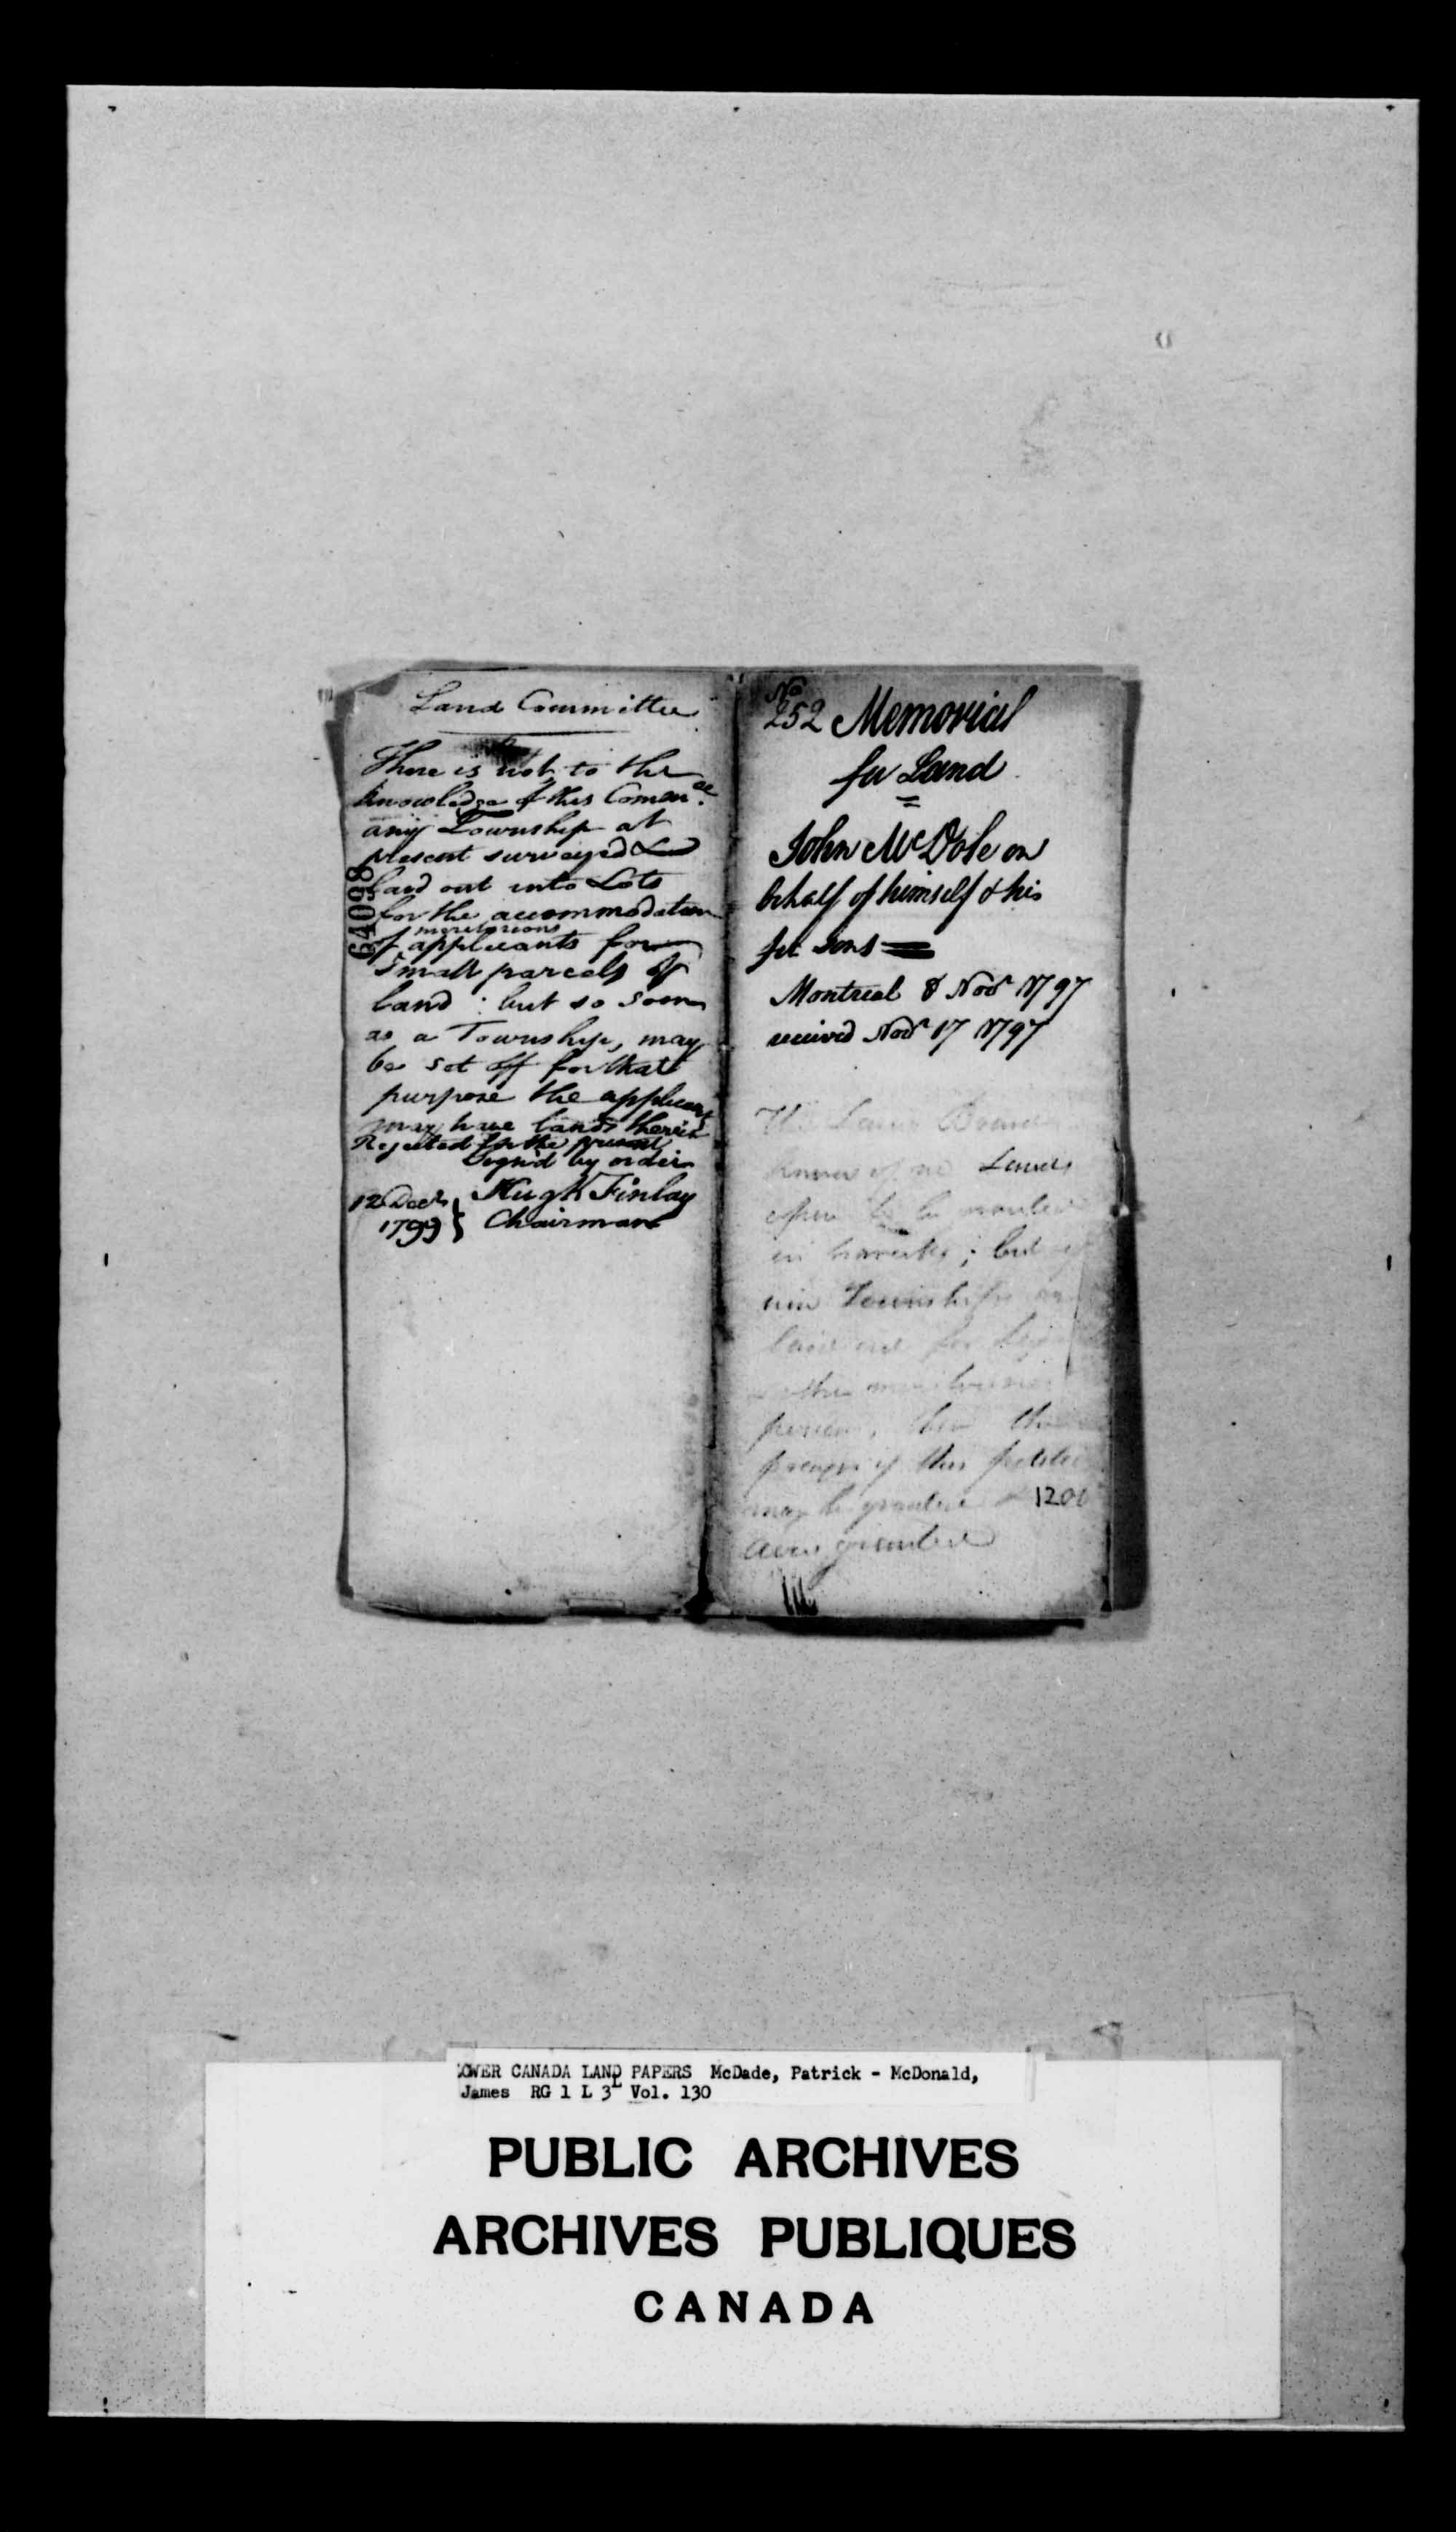 Digitized page of  for Image No.: e008709161